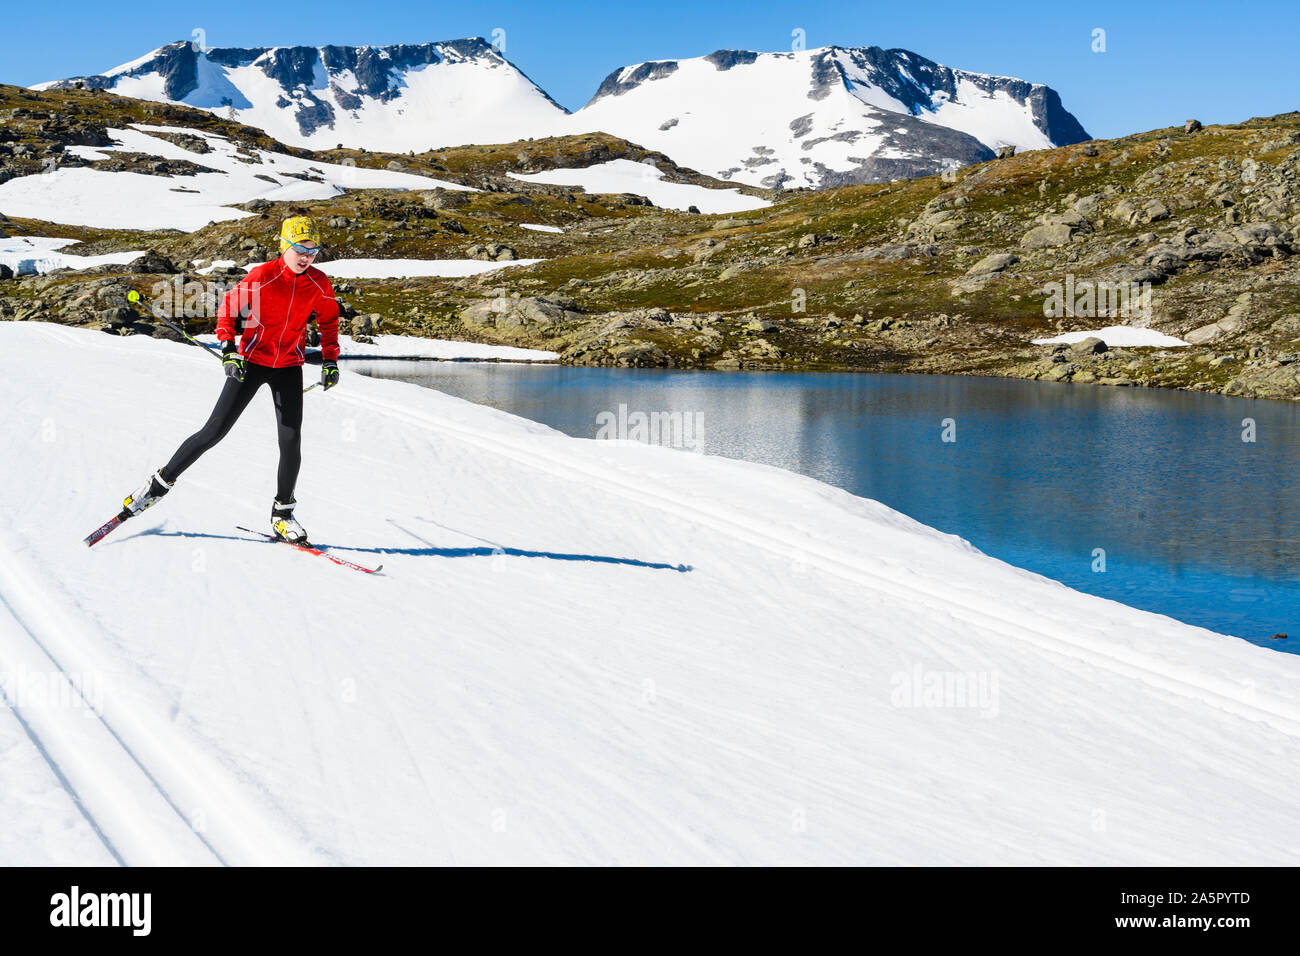 Man cross-country skiing in mountains Stock Photo